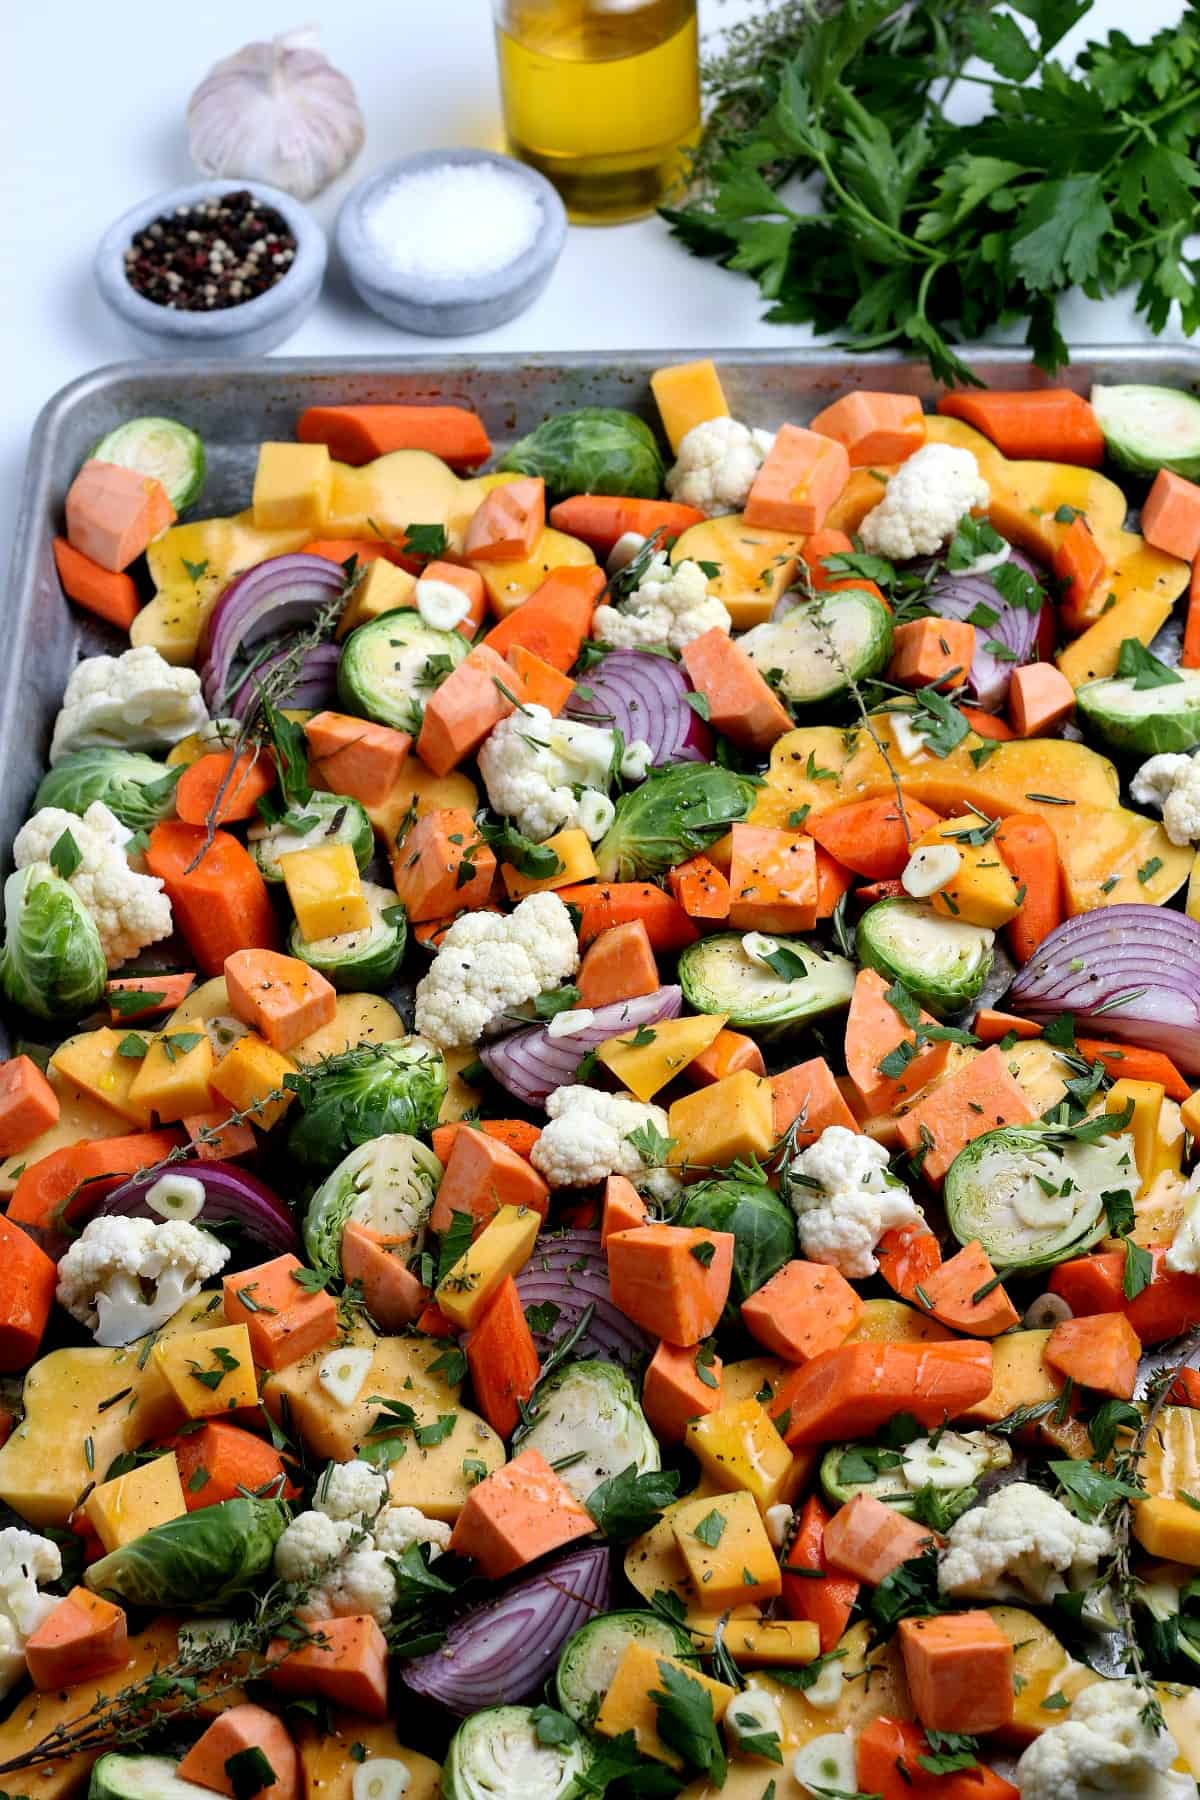 Vegetables after being roasted and still on the baking sheet.